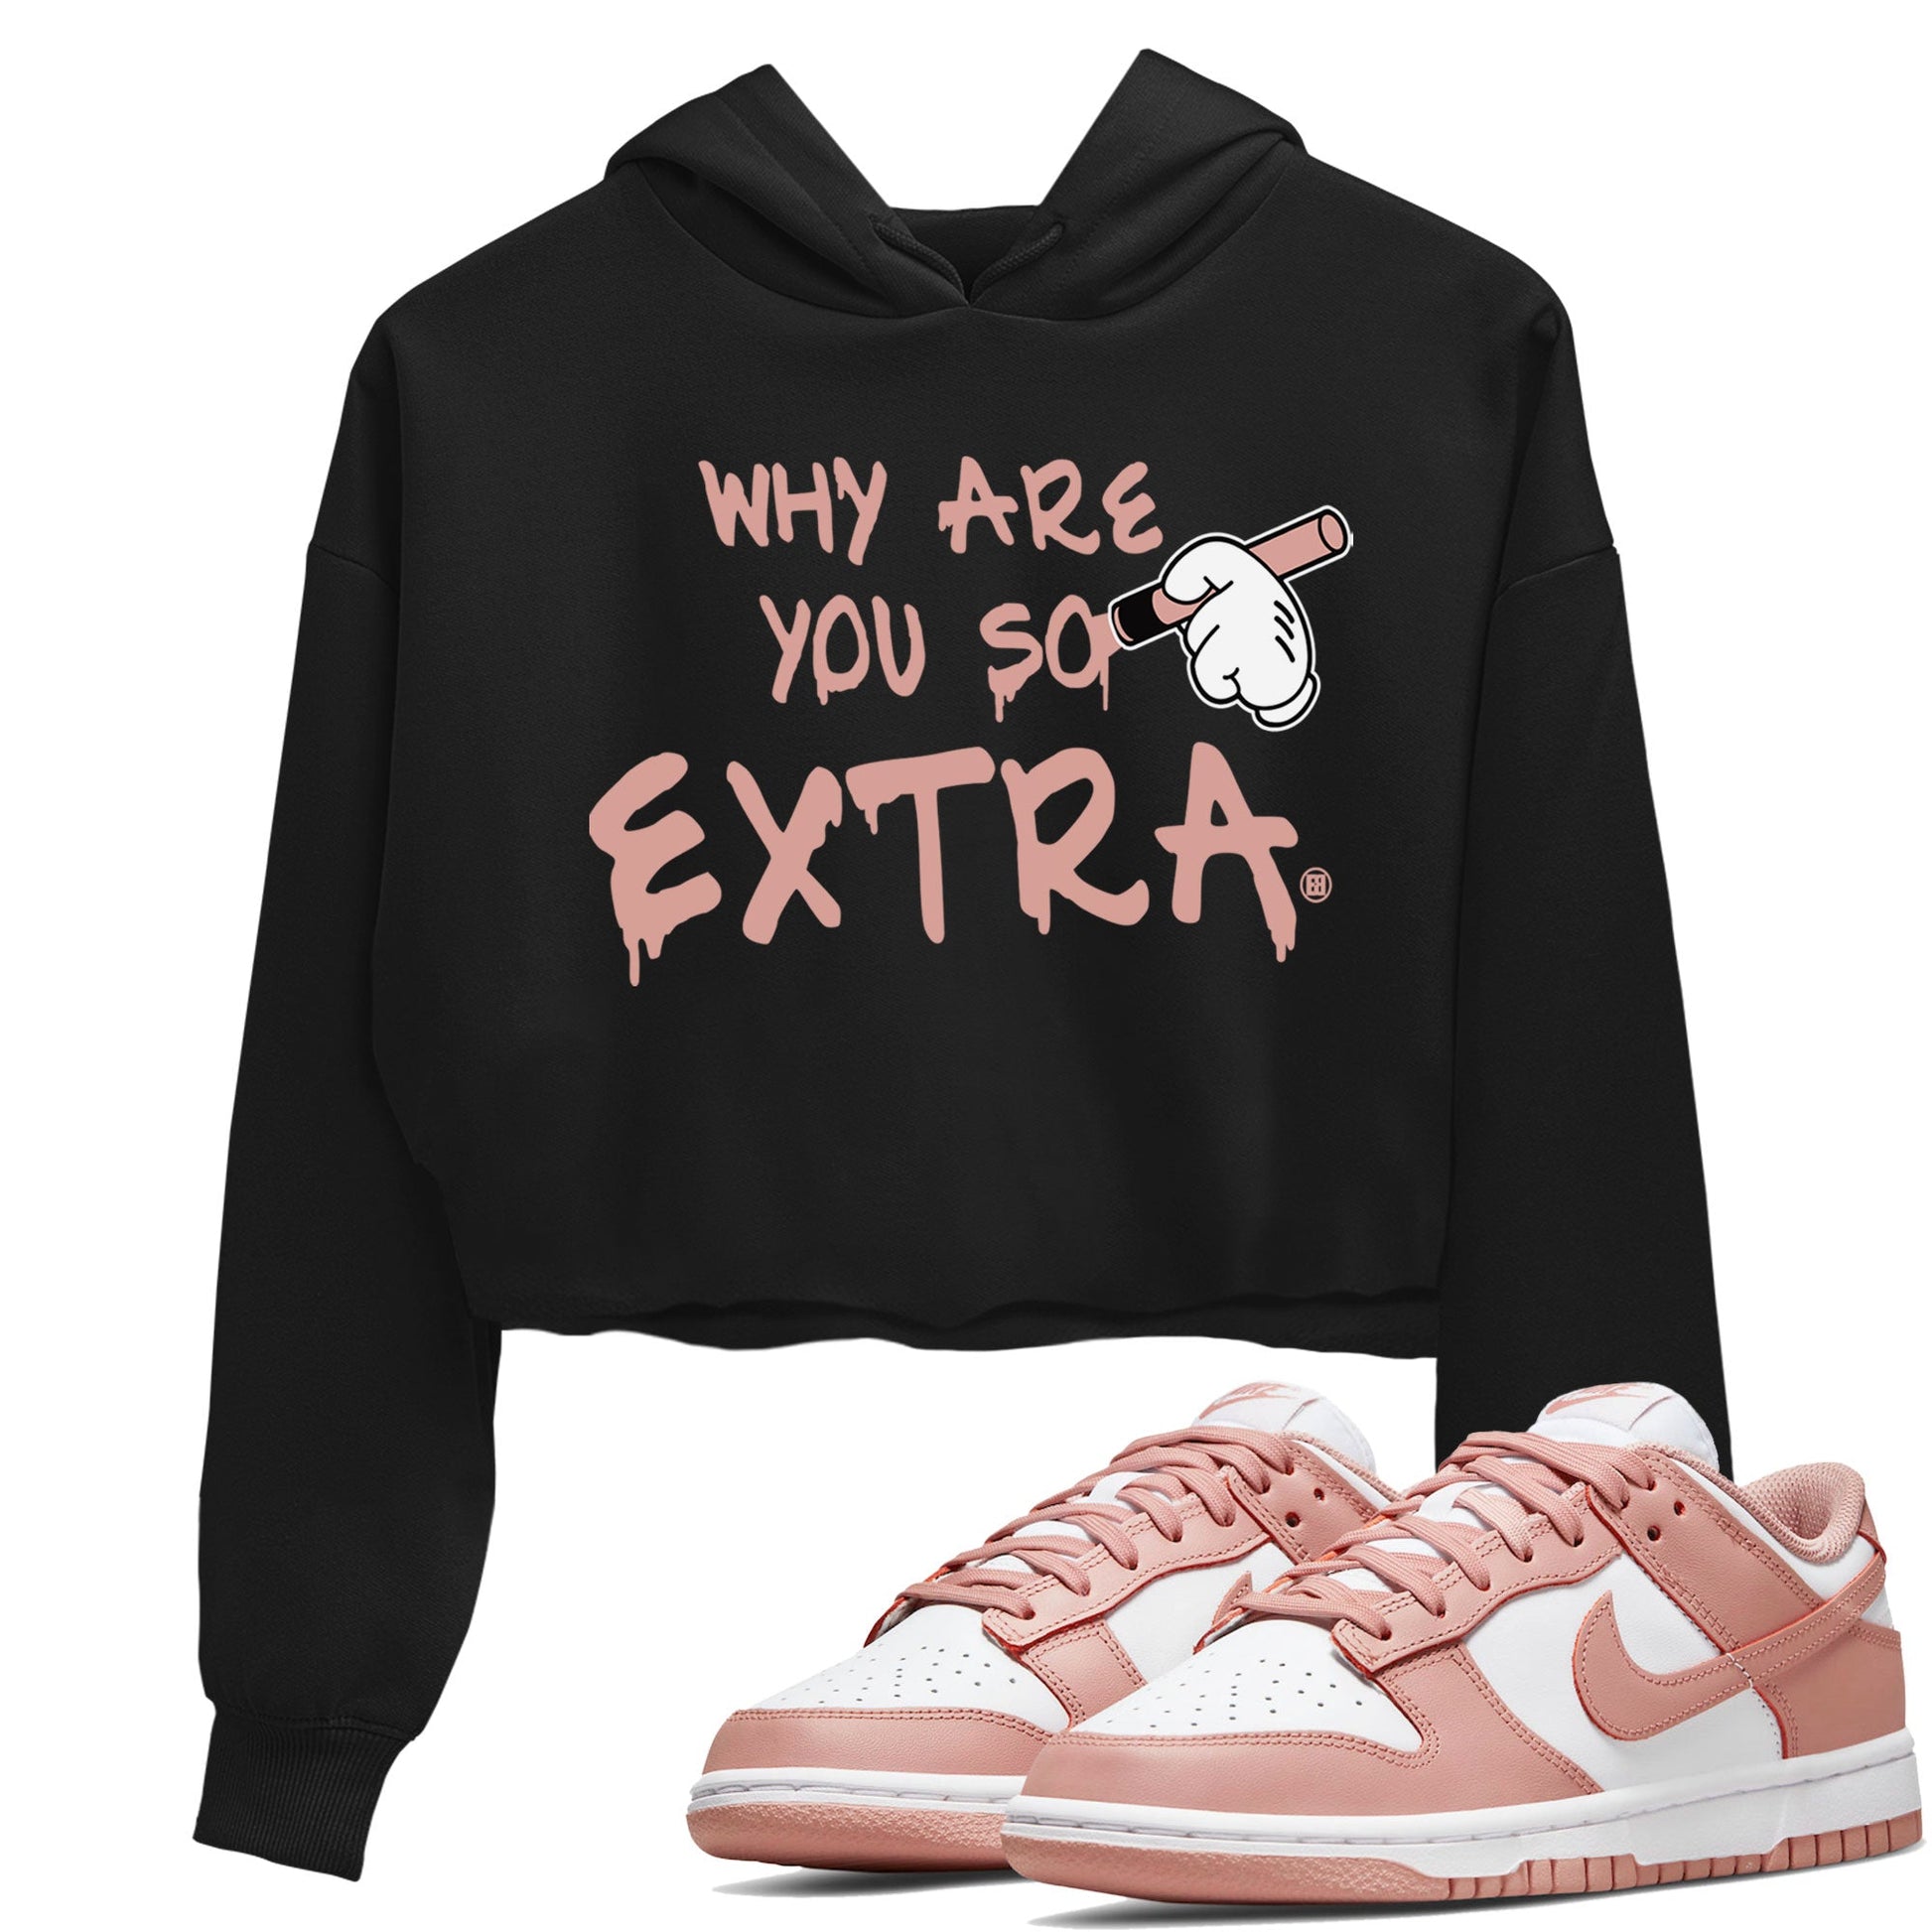 Dunks Low Rose Whisper shirt to match jordans Why Are You So Extra sneaker tees Dunk Rose Whisper SNRT Sneaker Release Tees Black 1 Crop T-Shirt